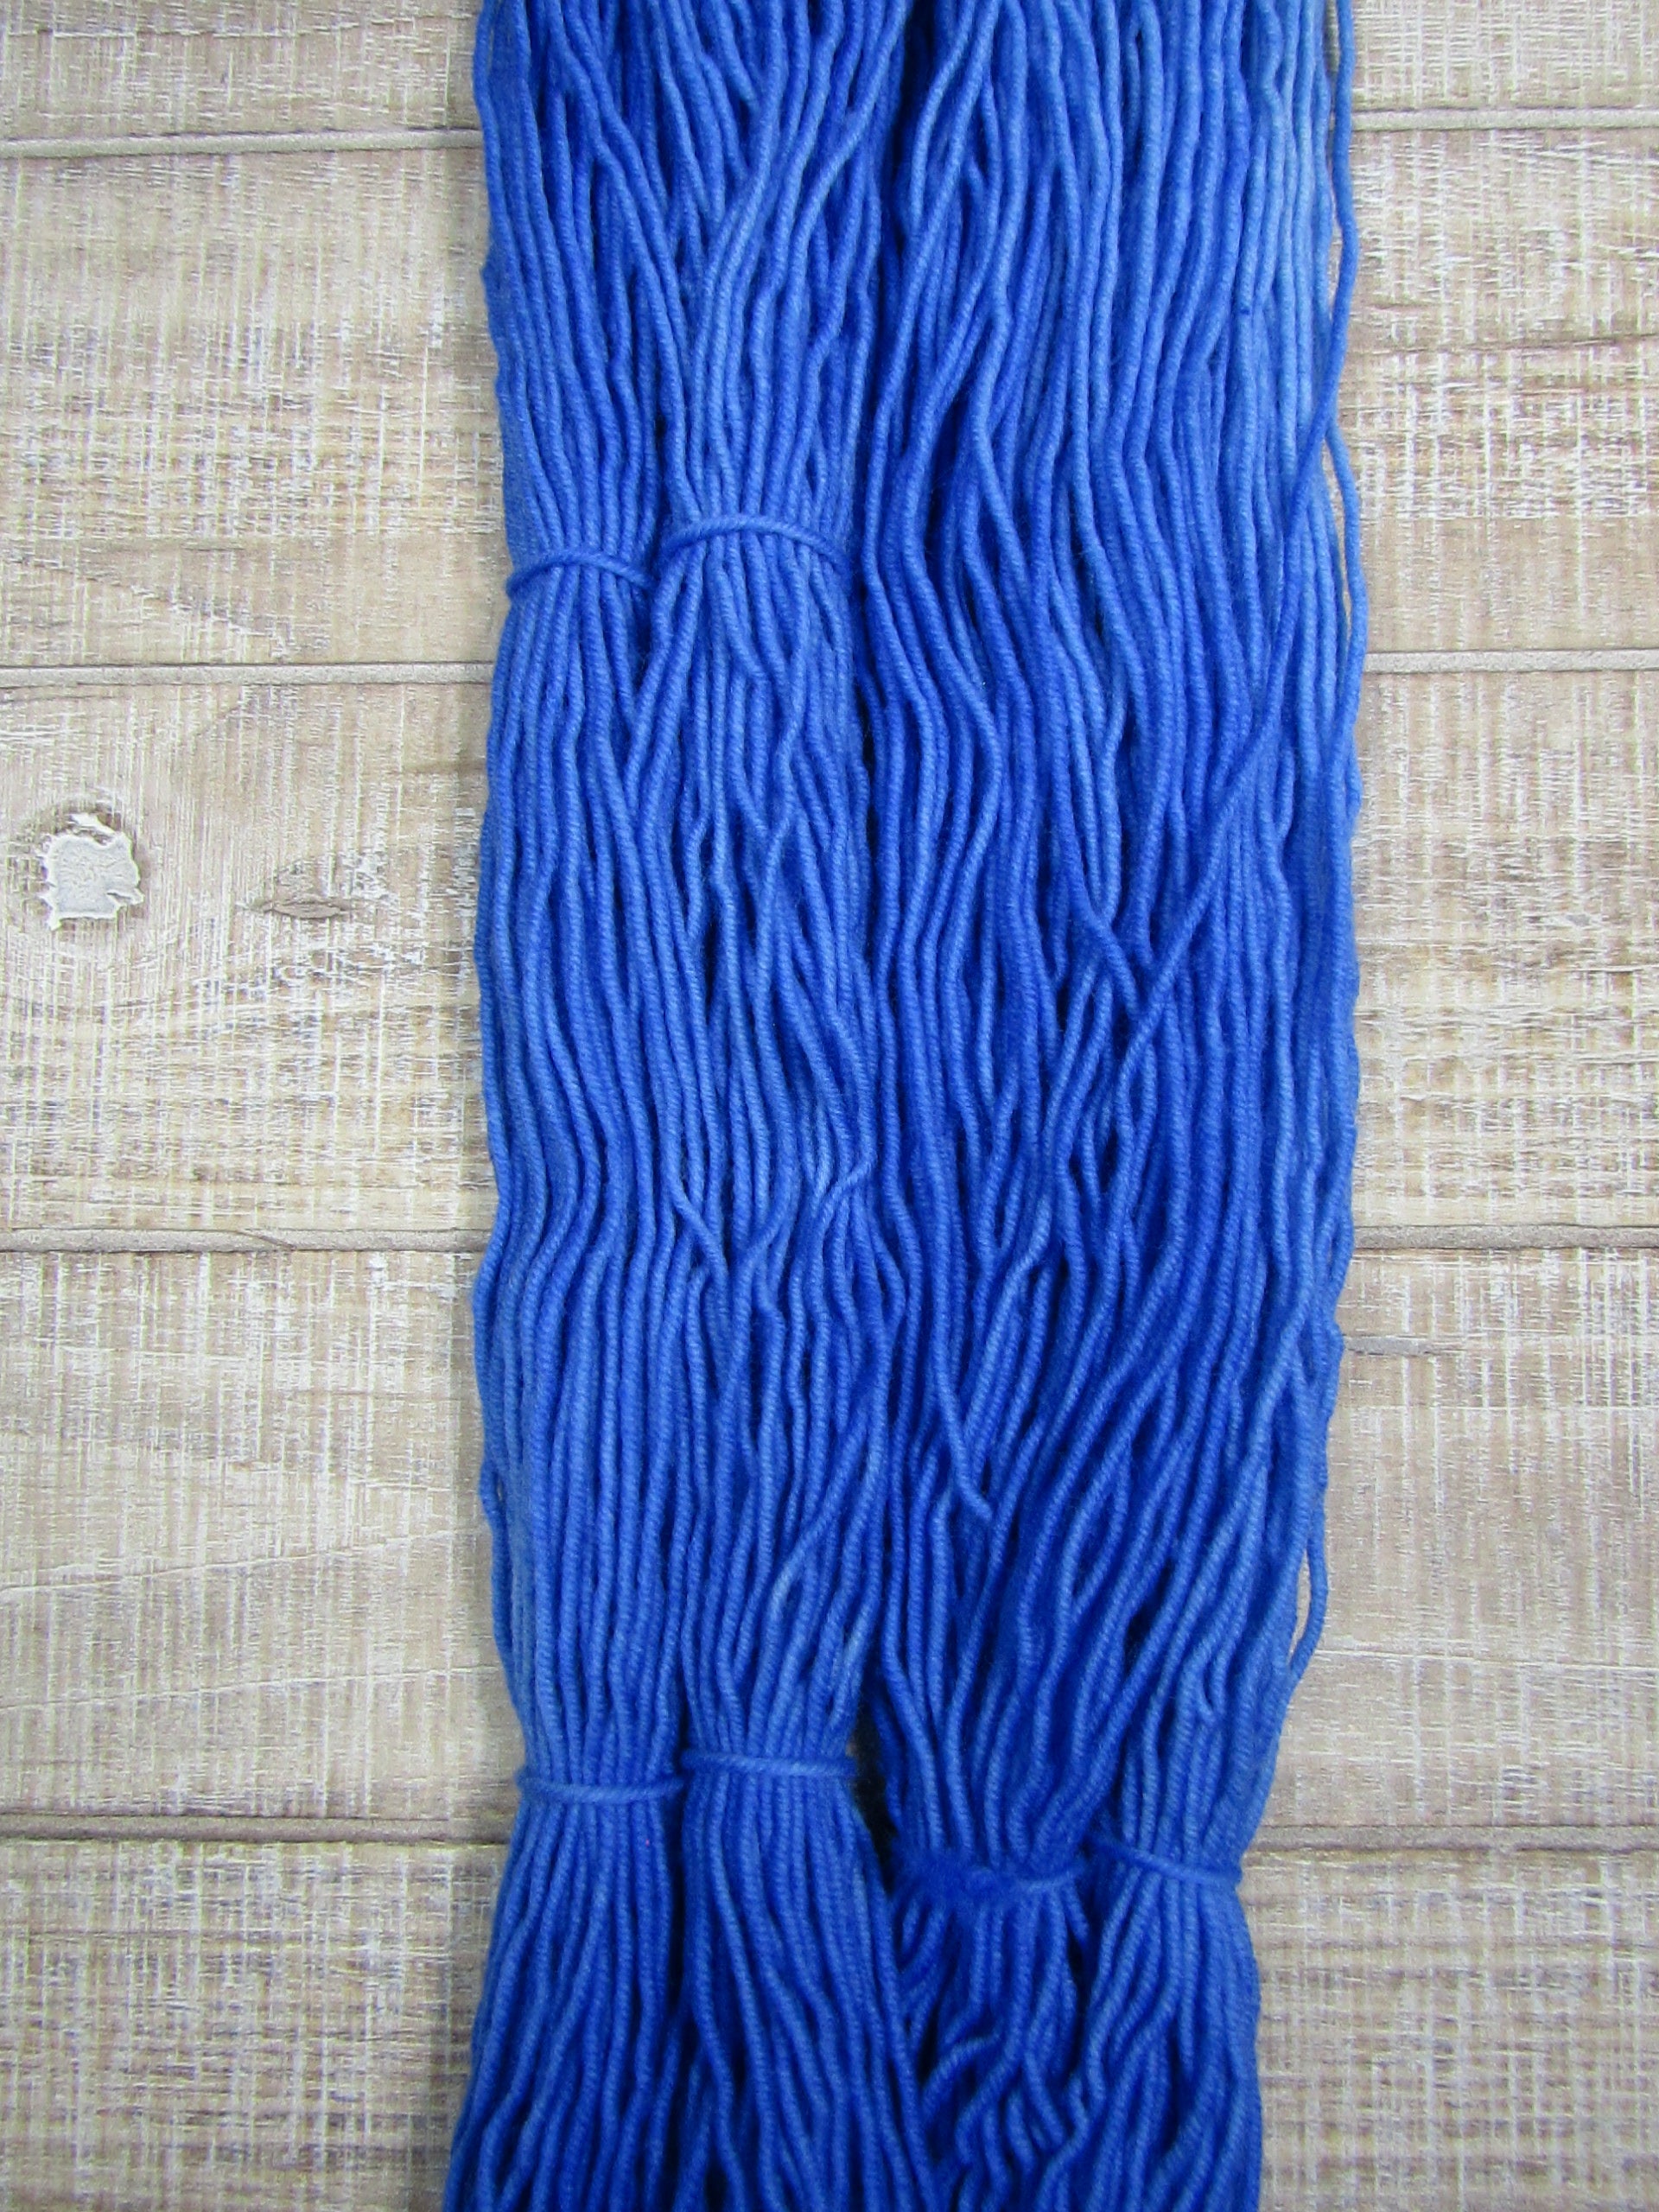 Hand-dyed yarn - Sapphire Merino/Cashstyle nylon worsted weight yarn in a sapphire blue color.